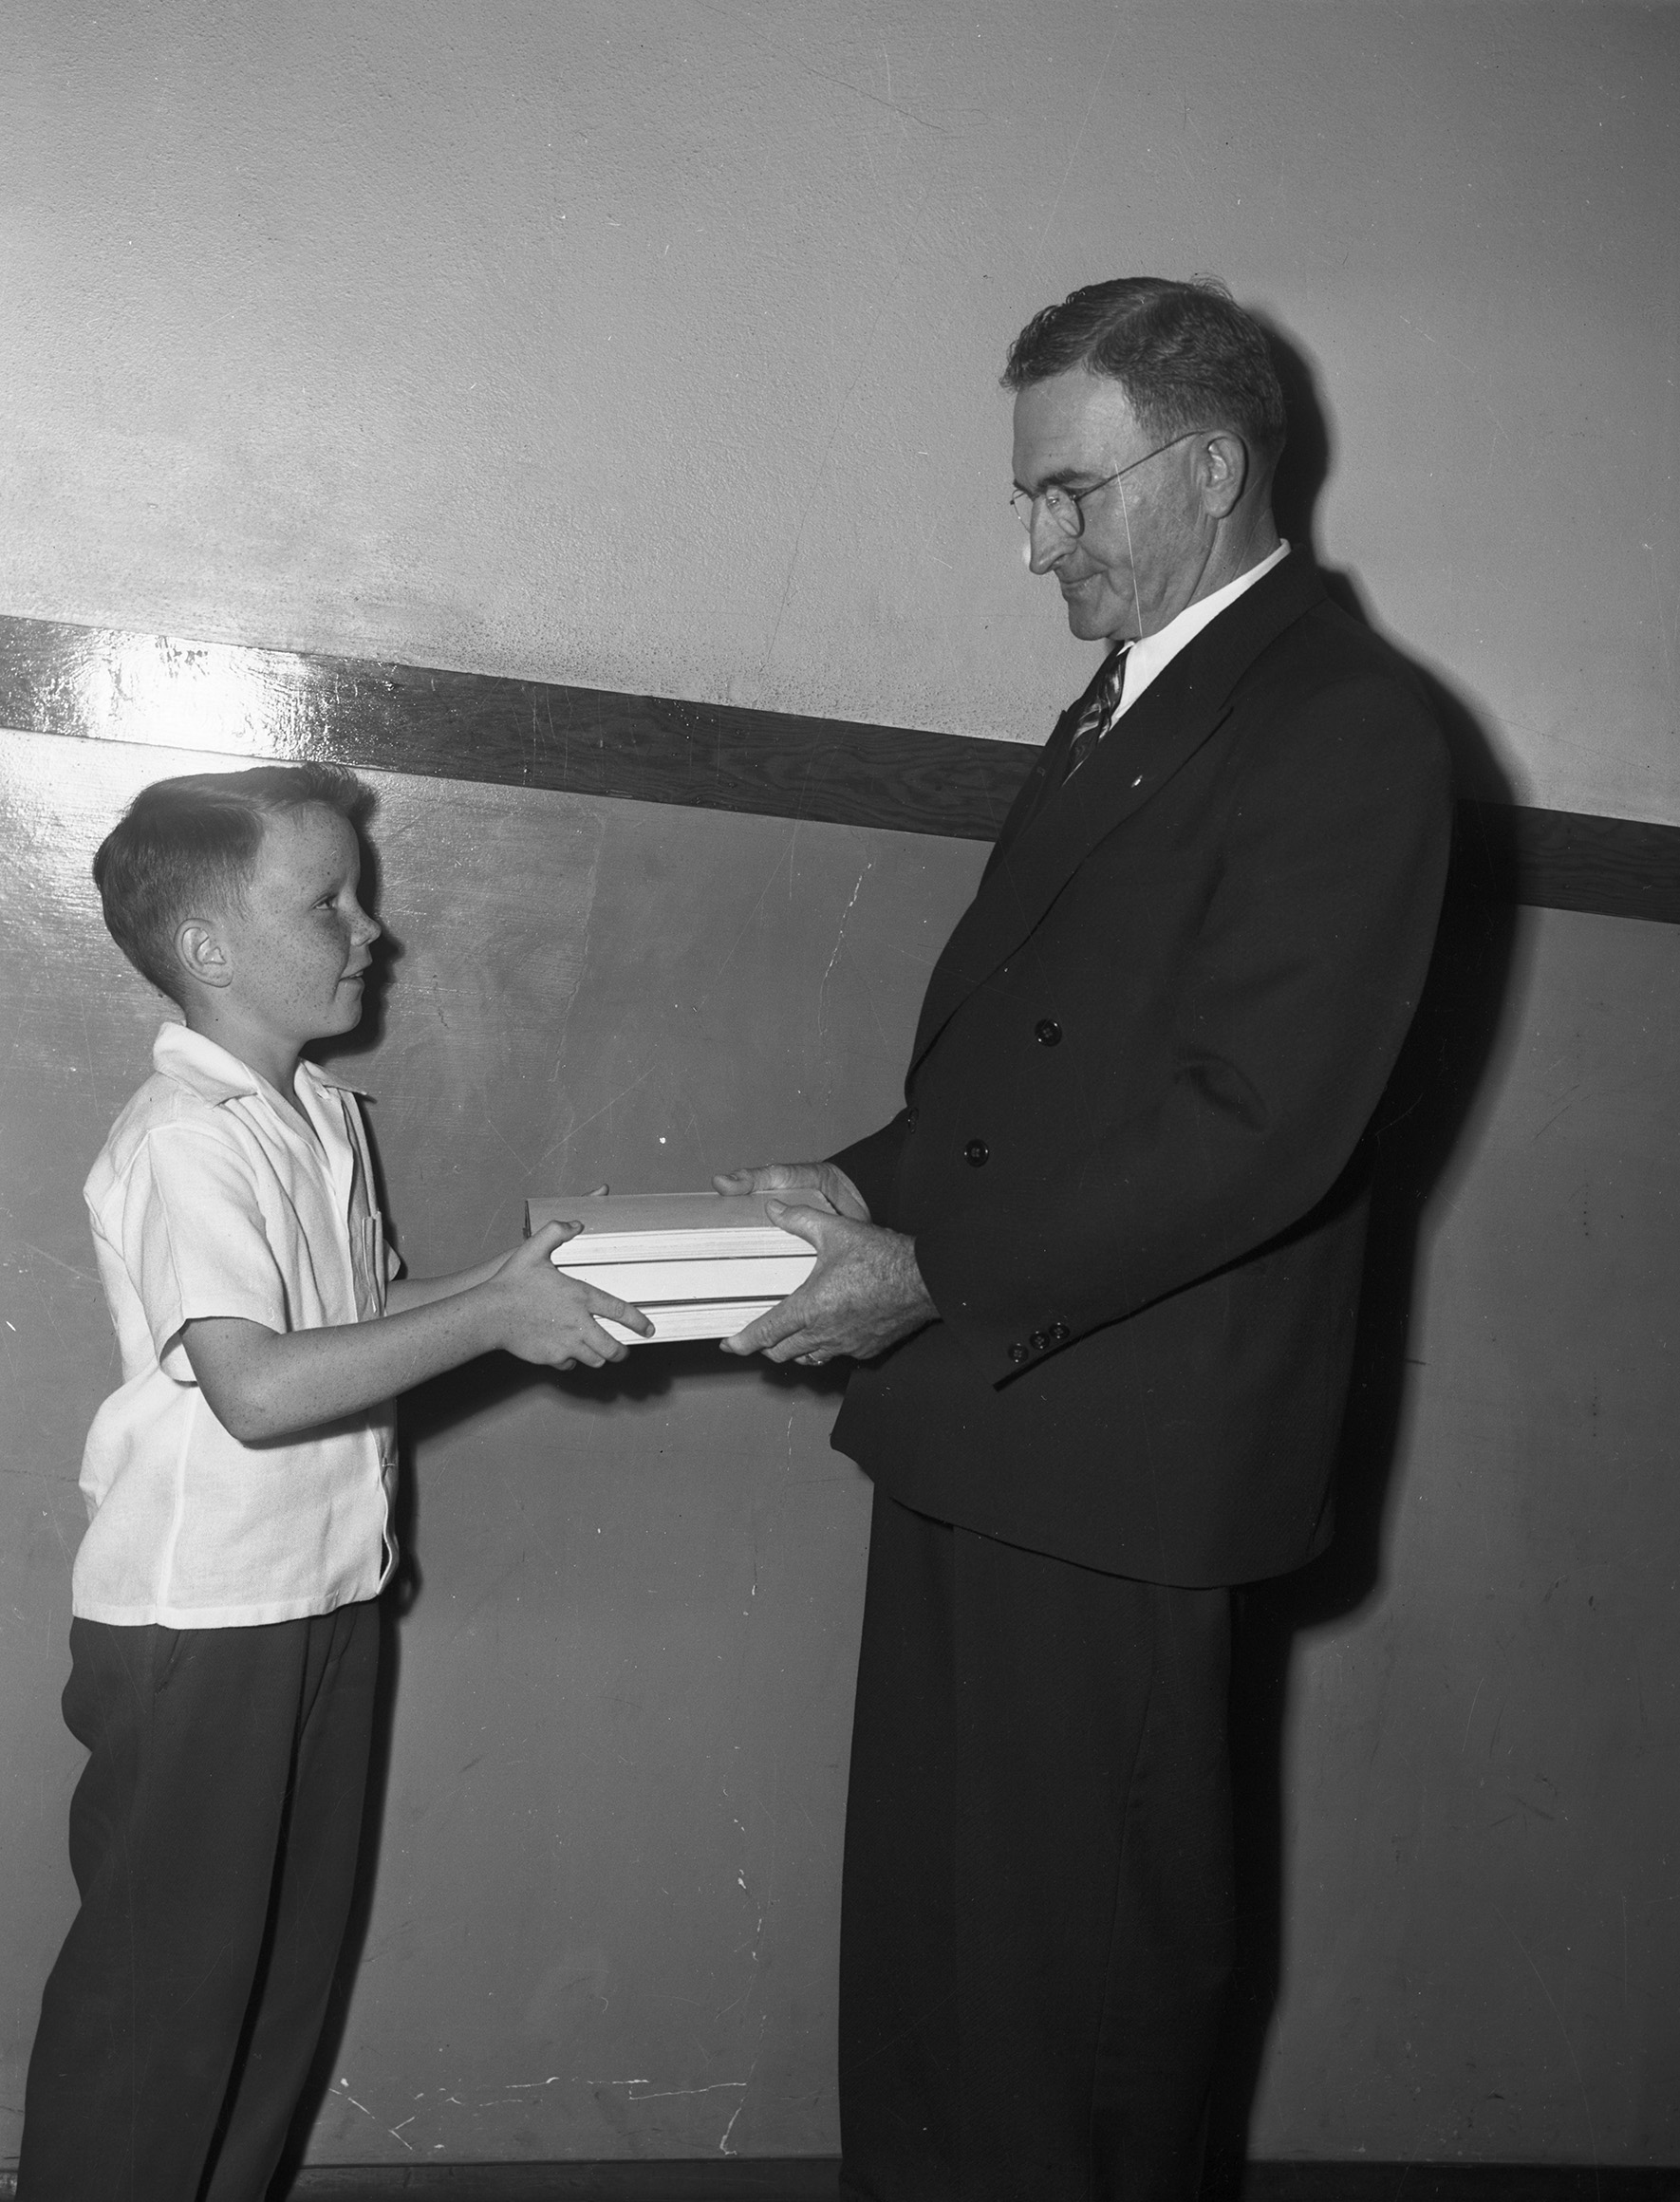 James Jennings, left, fifth grade pupil at Diamond Hill School, accepts a gift of books from J. J. Boydstun as a memorial to his former classmate, Walter Leon Pool. James is wearing a shirt and trousers and Mr. Boydstun is wearing a suit and eyeglasses.